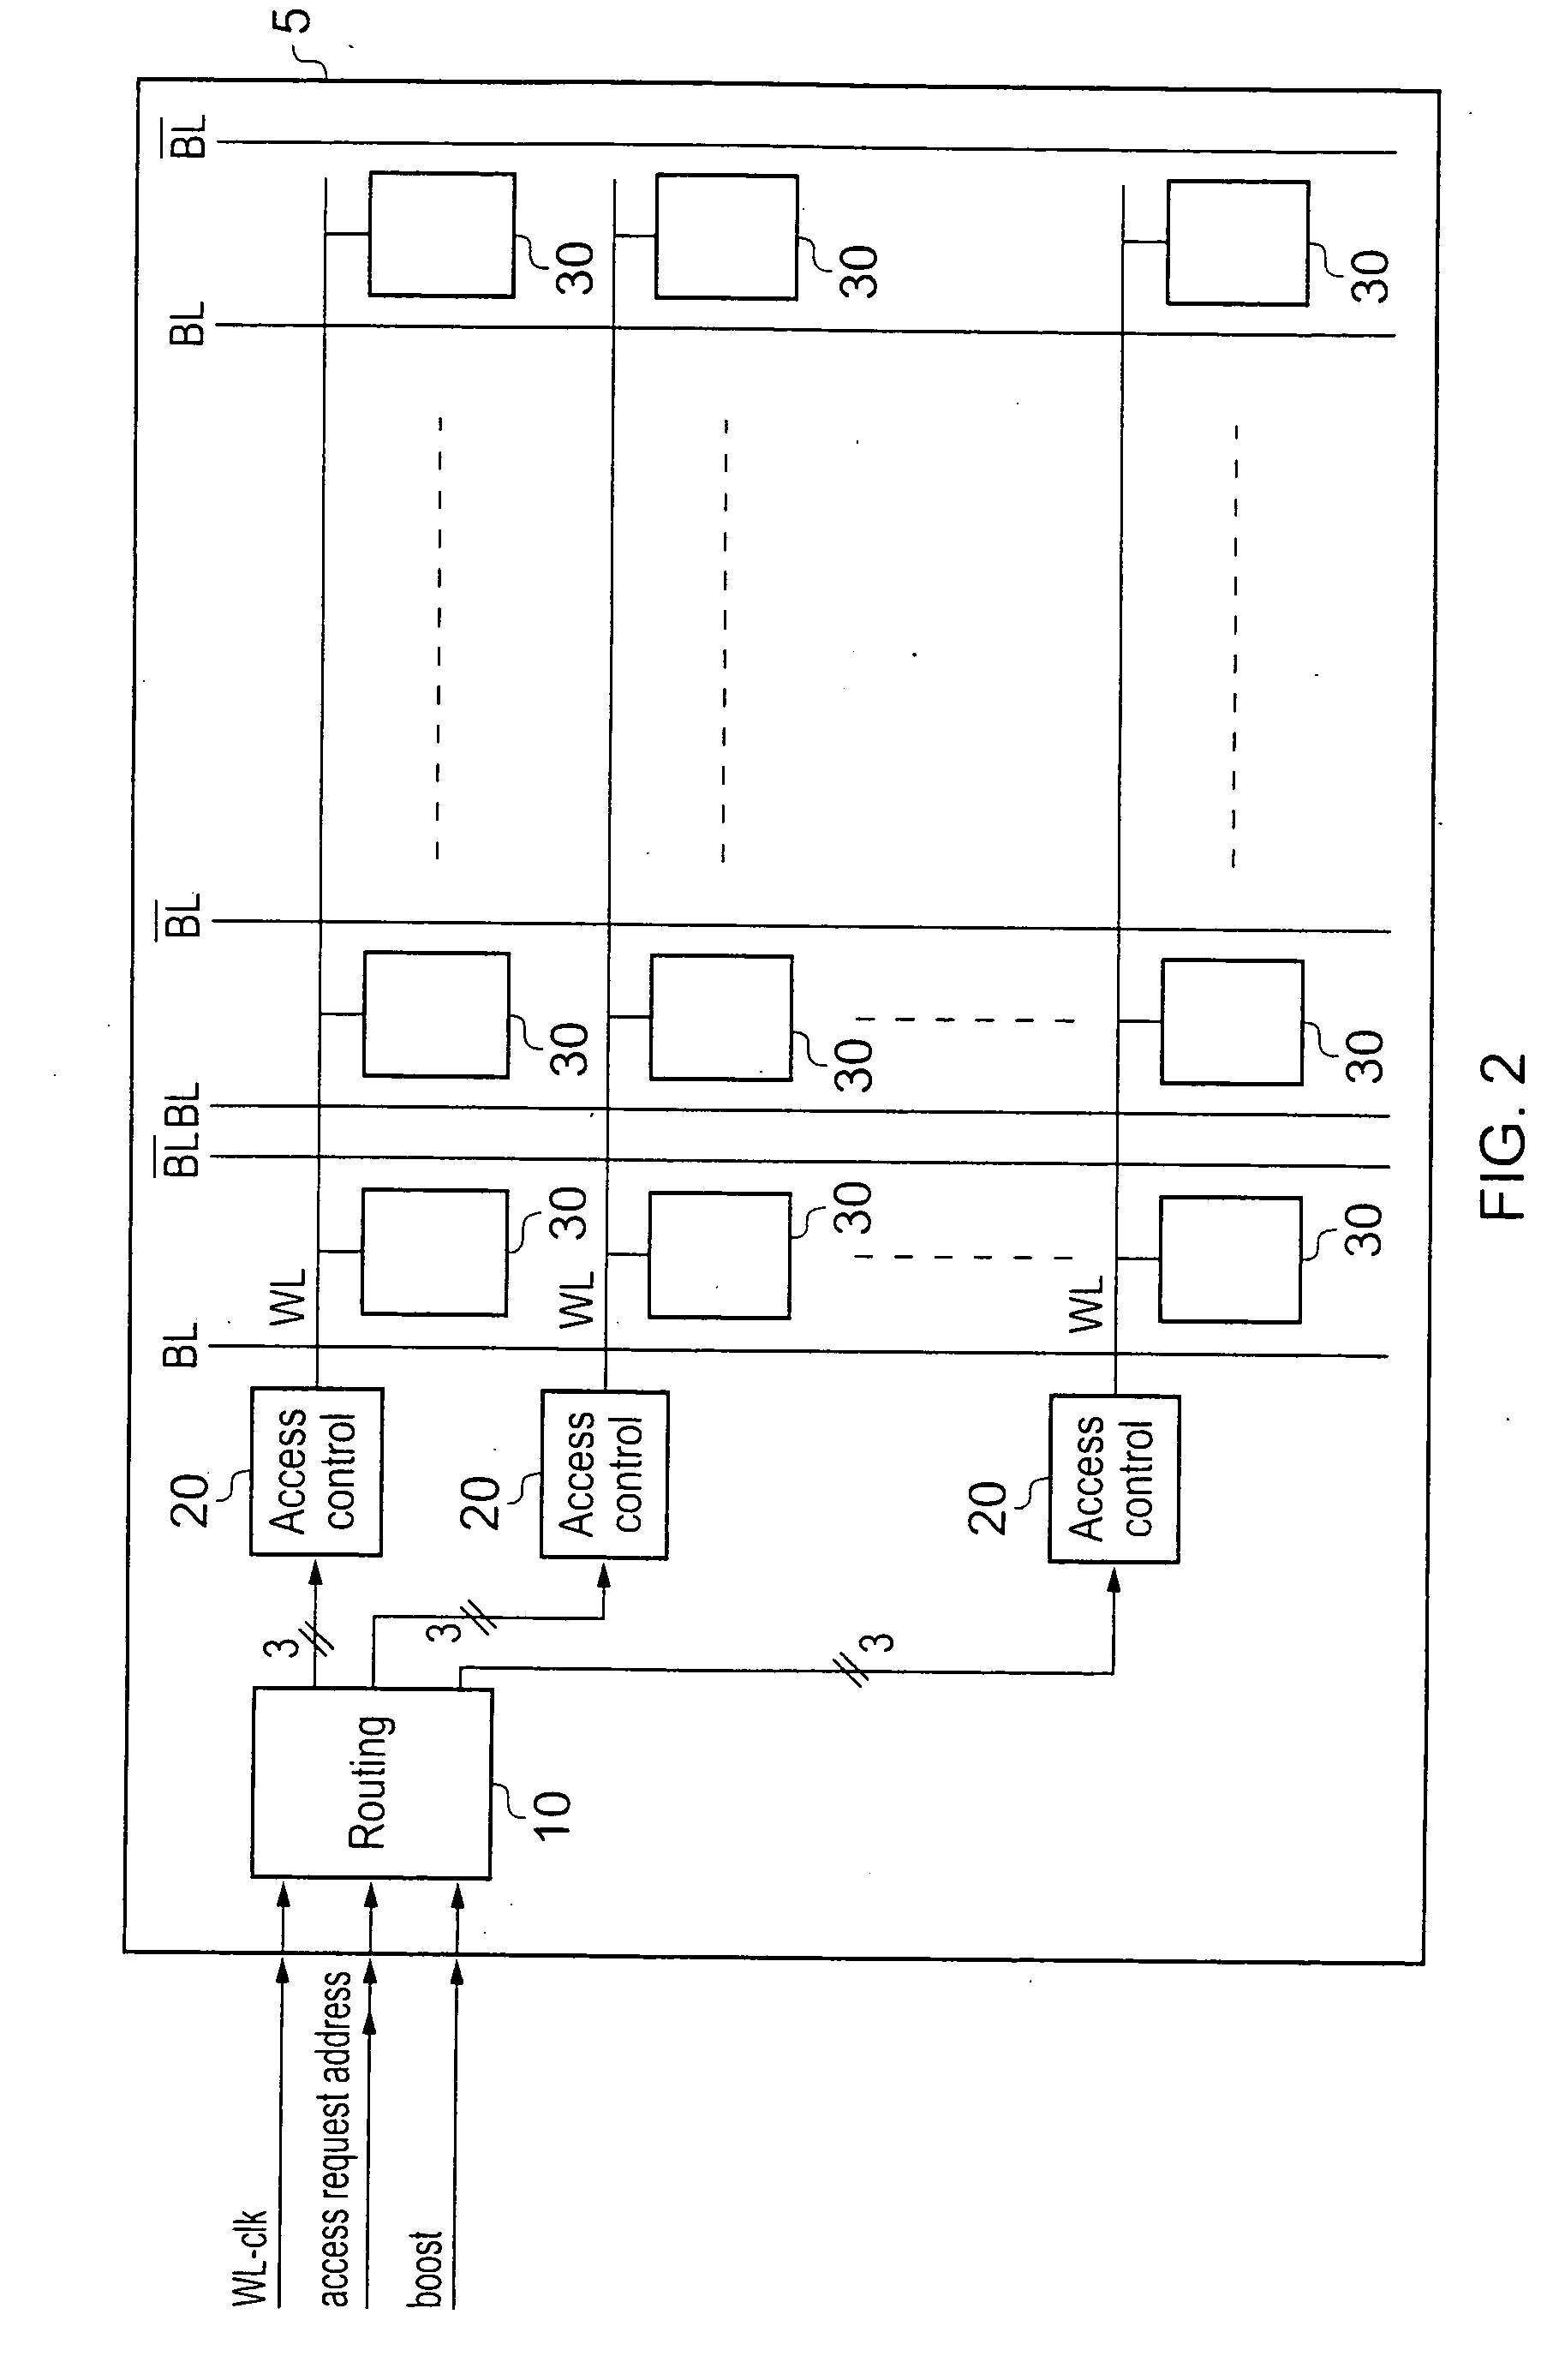 Boosting voltage levels applied to an access control line when accessing storage cells in a memory